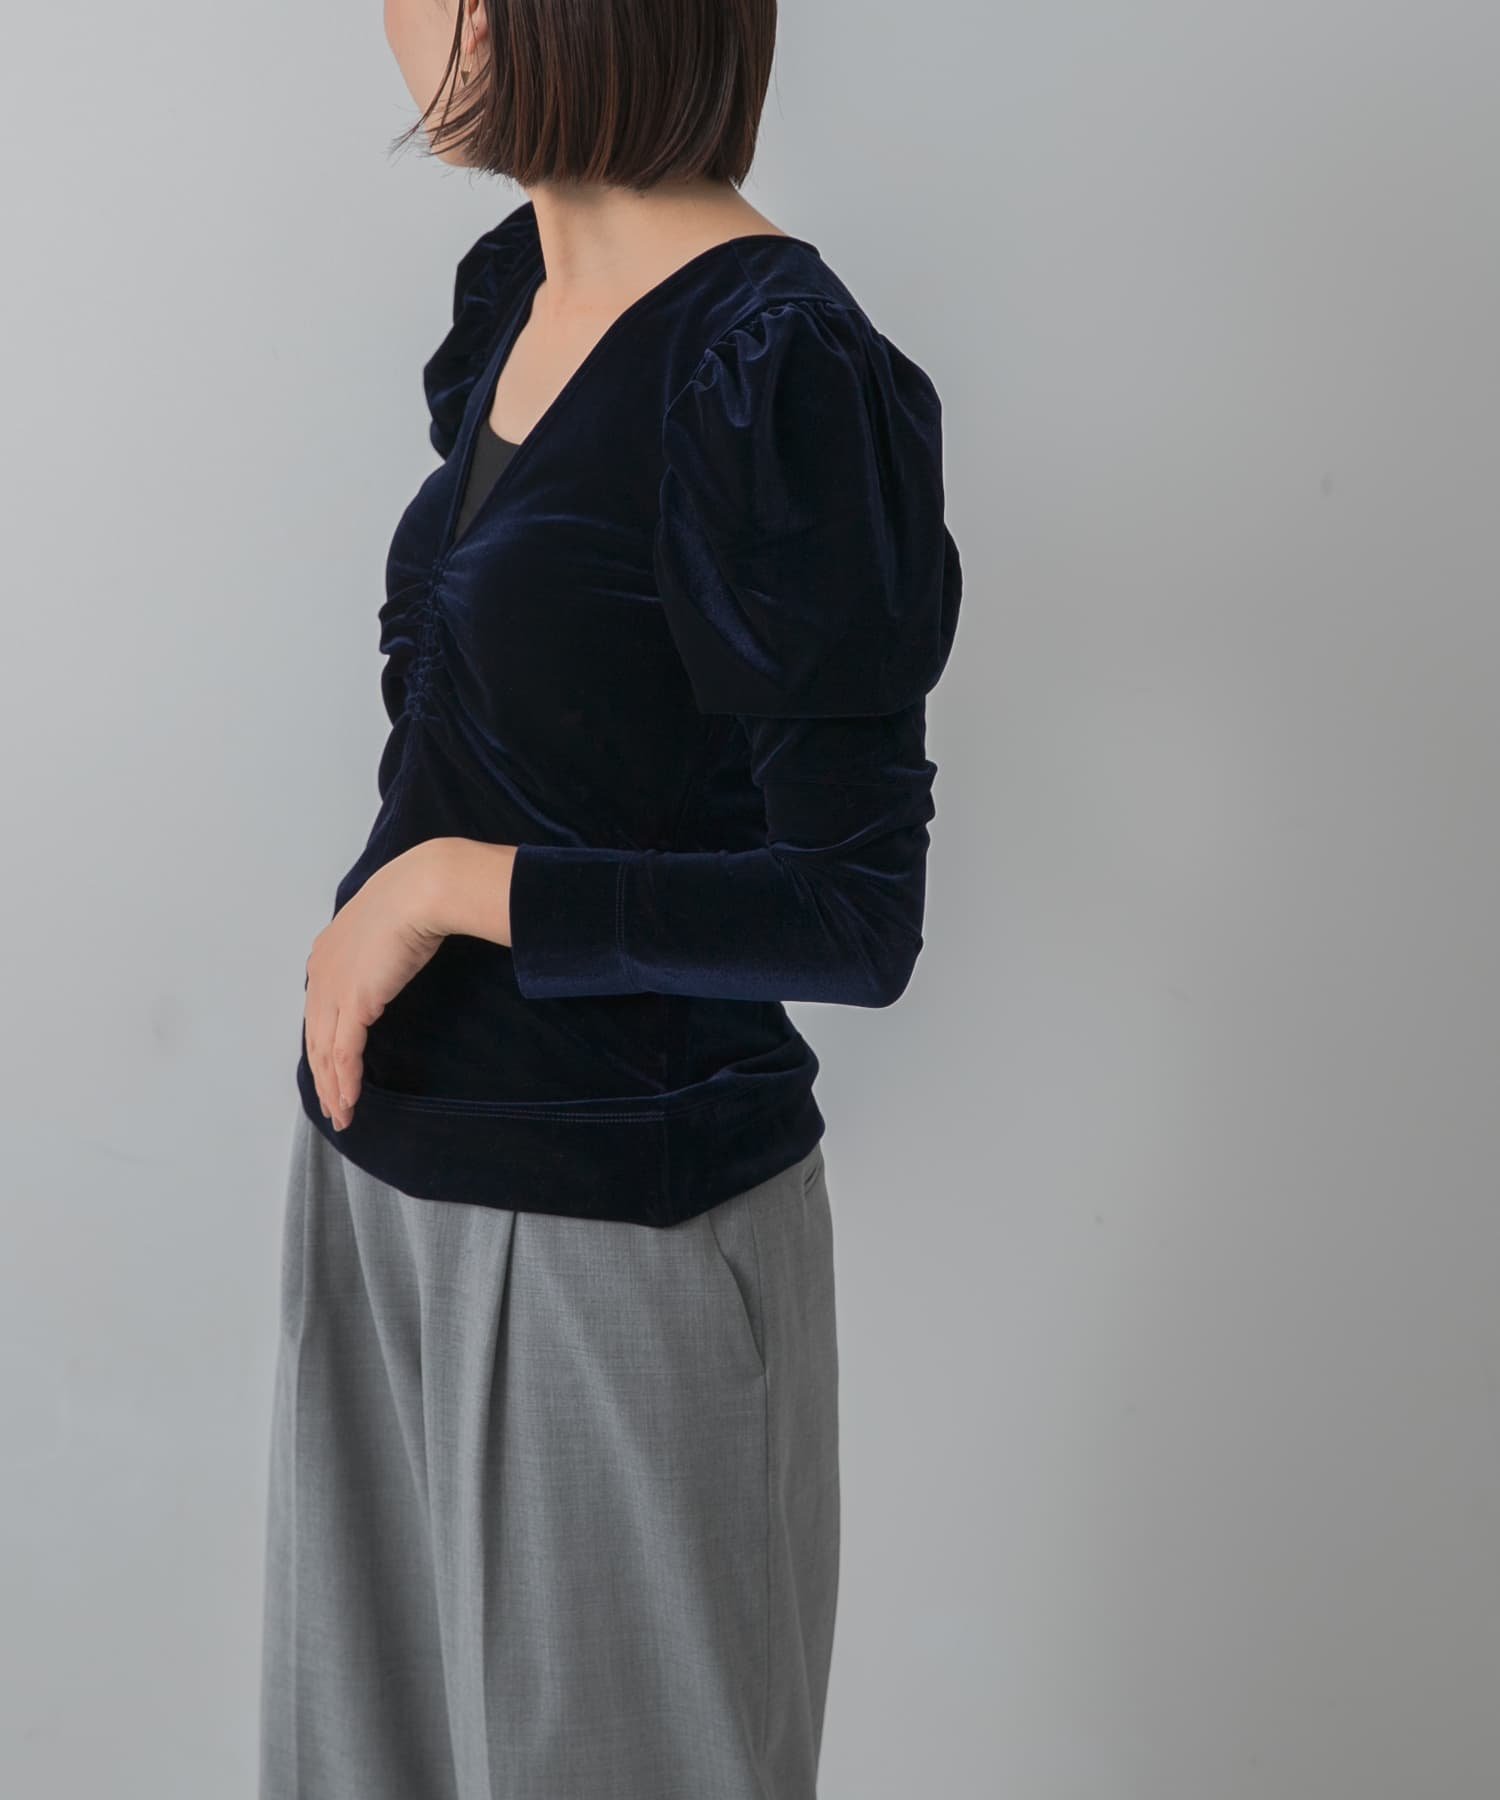 【SALE／50%OFF】URBAN RESEARCH GANNI VelvetJersey Blouse アーバンリサーチ トップス その他のトップス【送料無料】